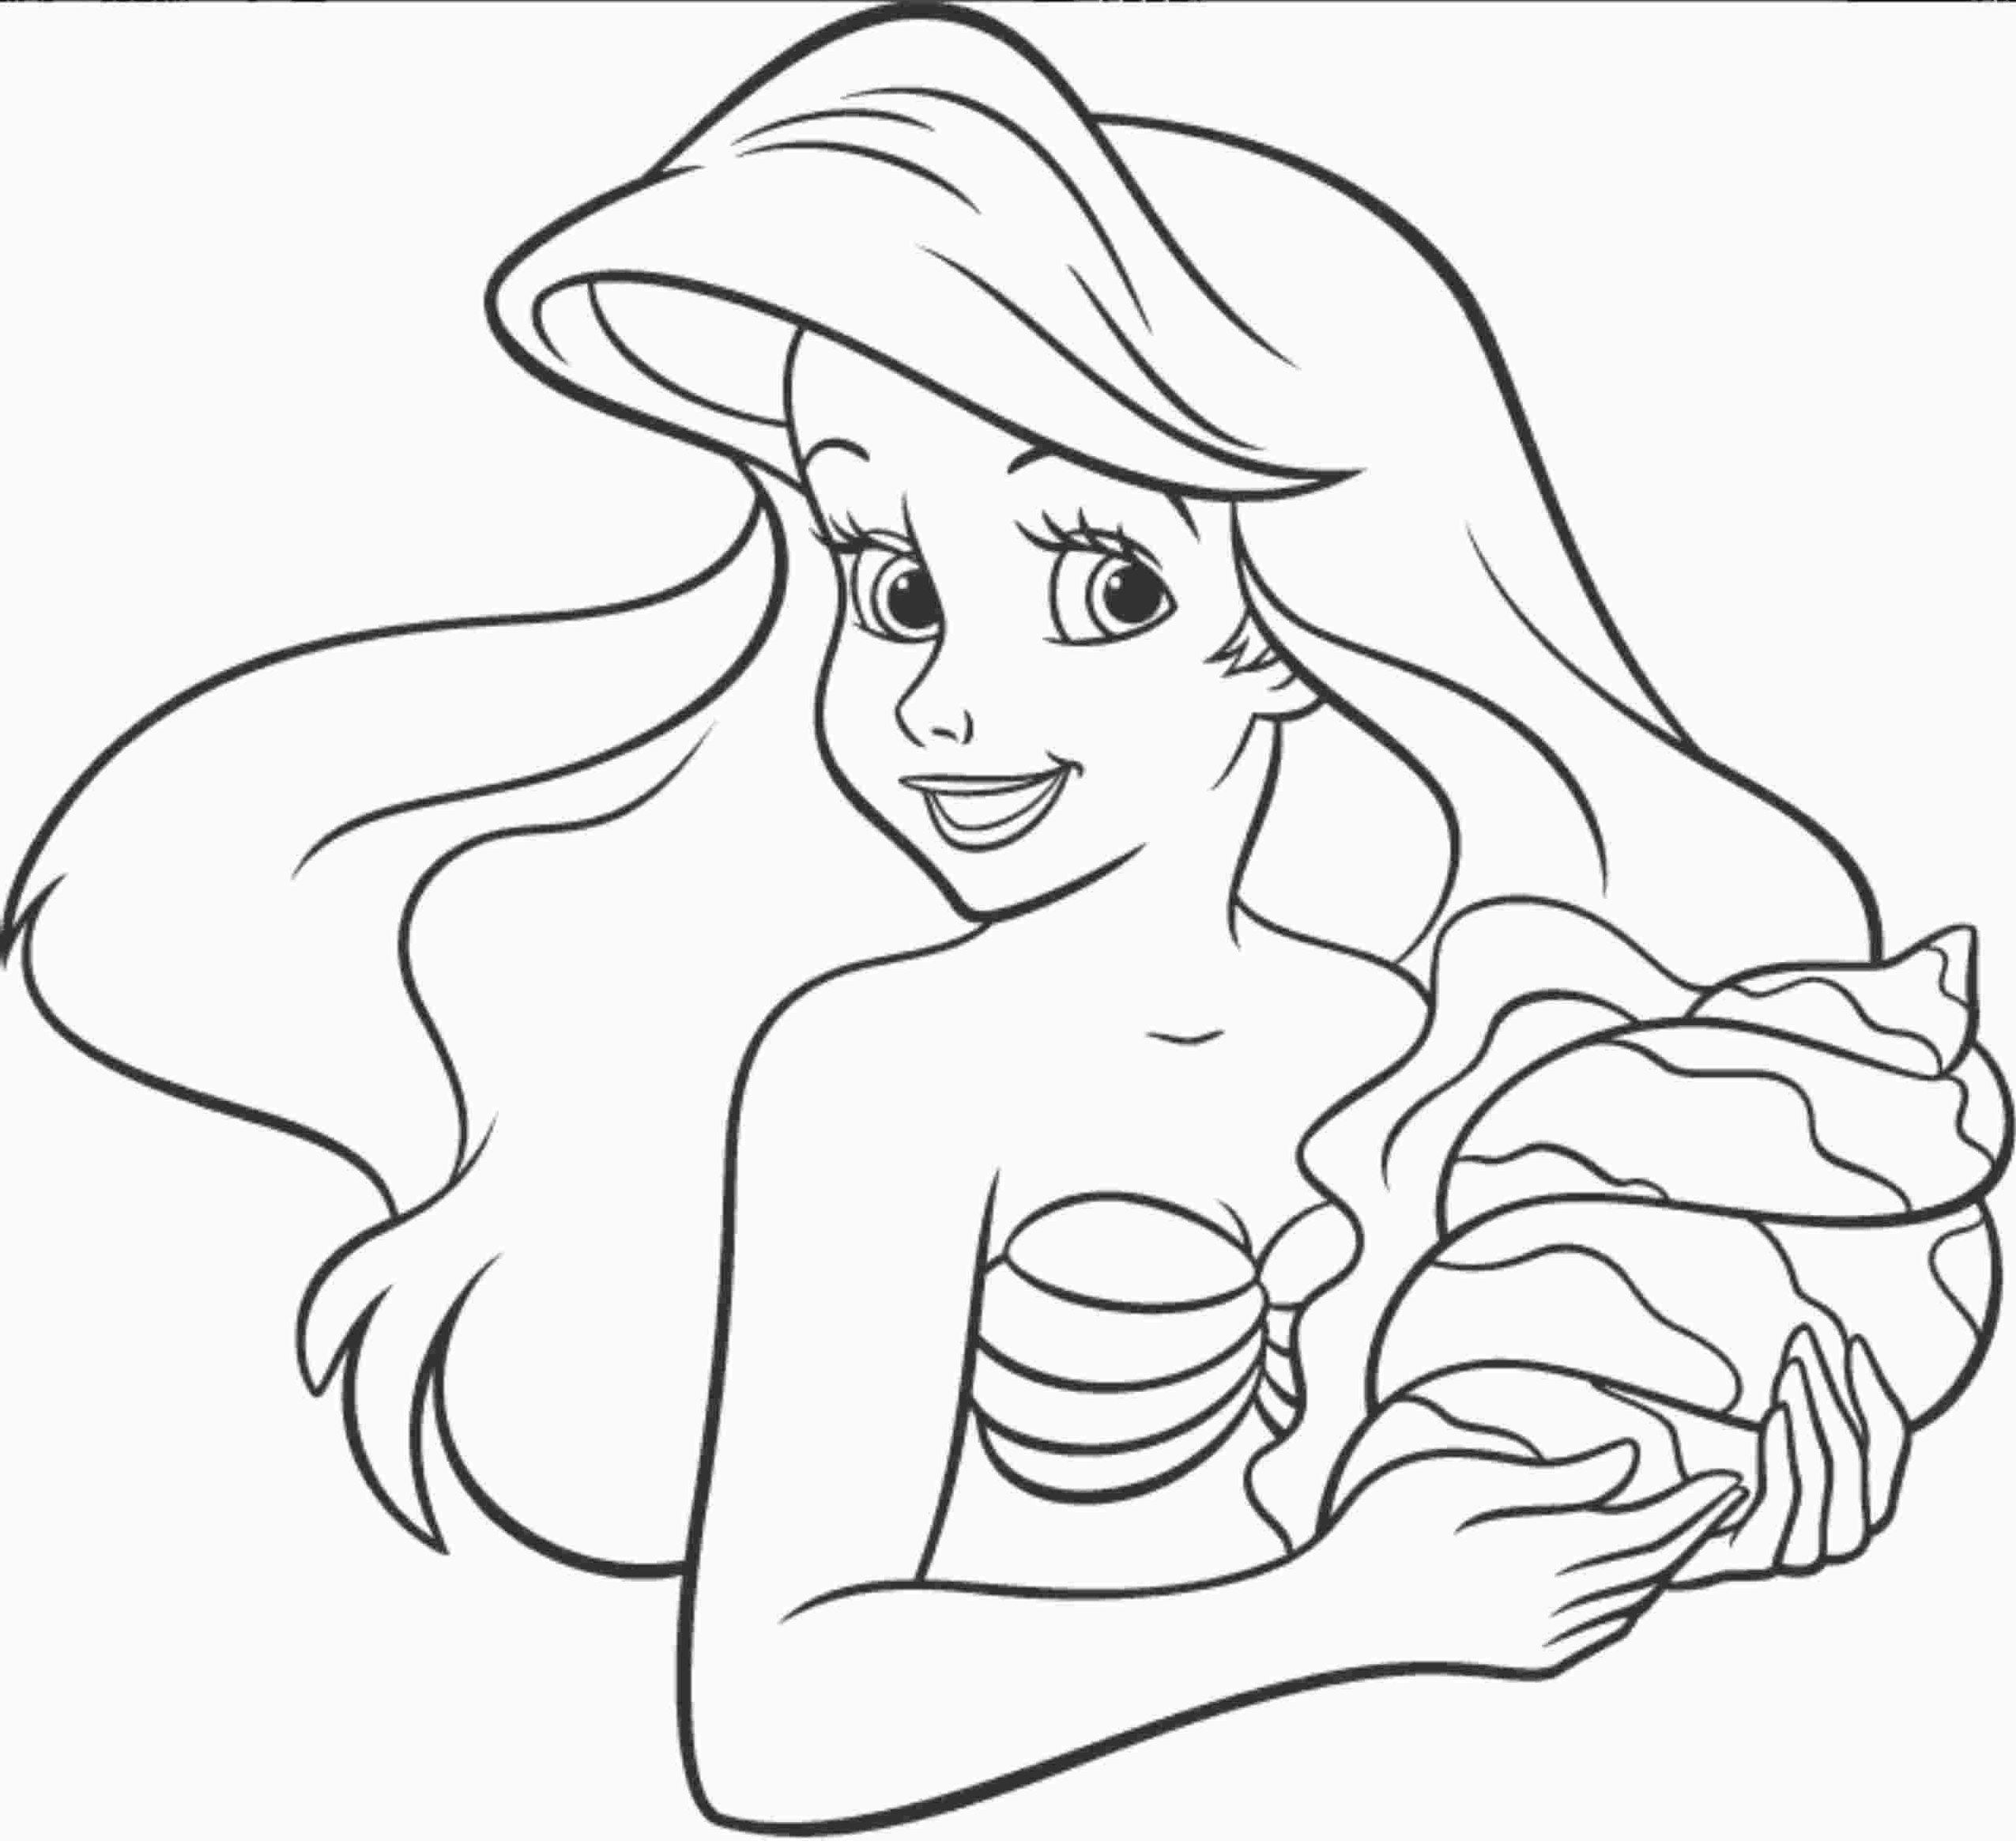 ursula from the little mermaid coloring pages - Printable Kids ...